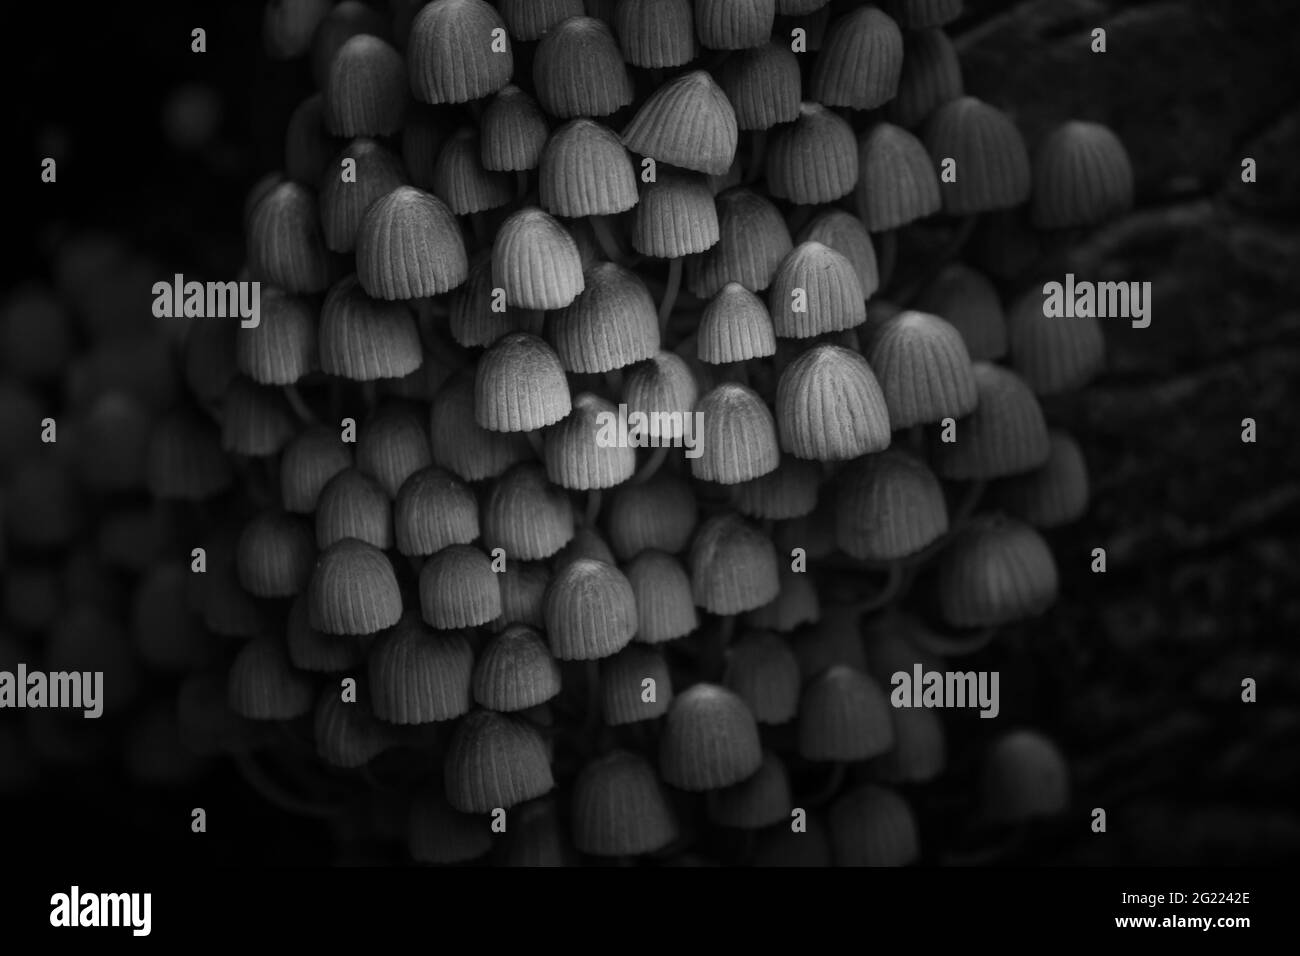 Group of mushroom with black& white effect Stock Photo